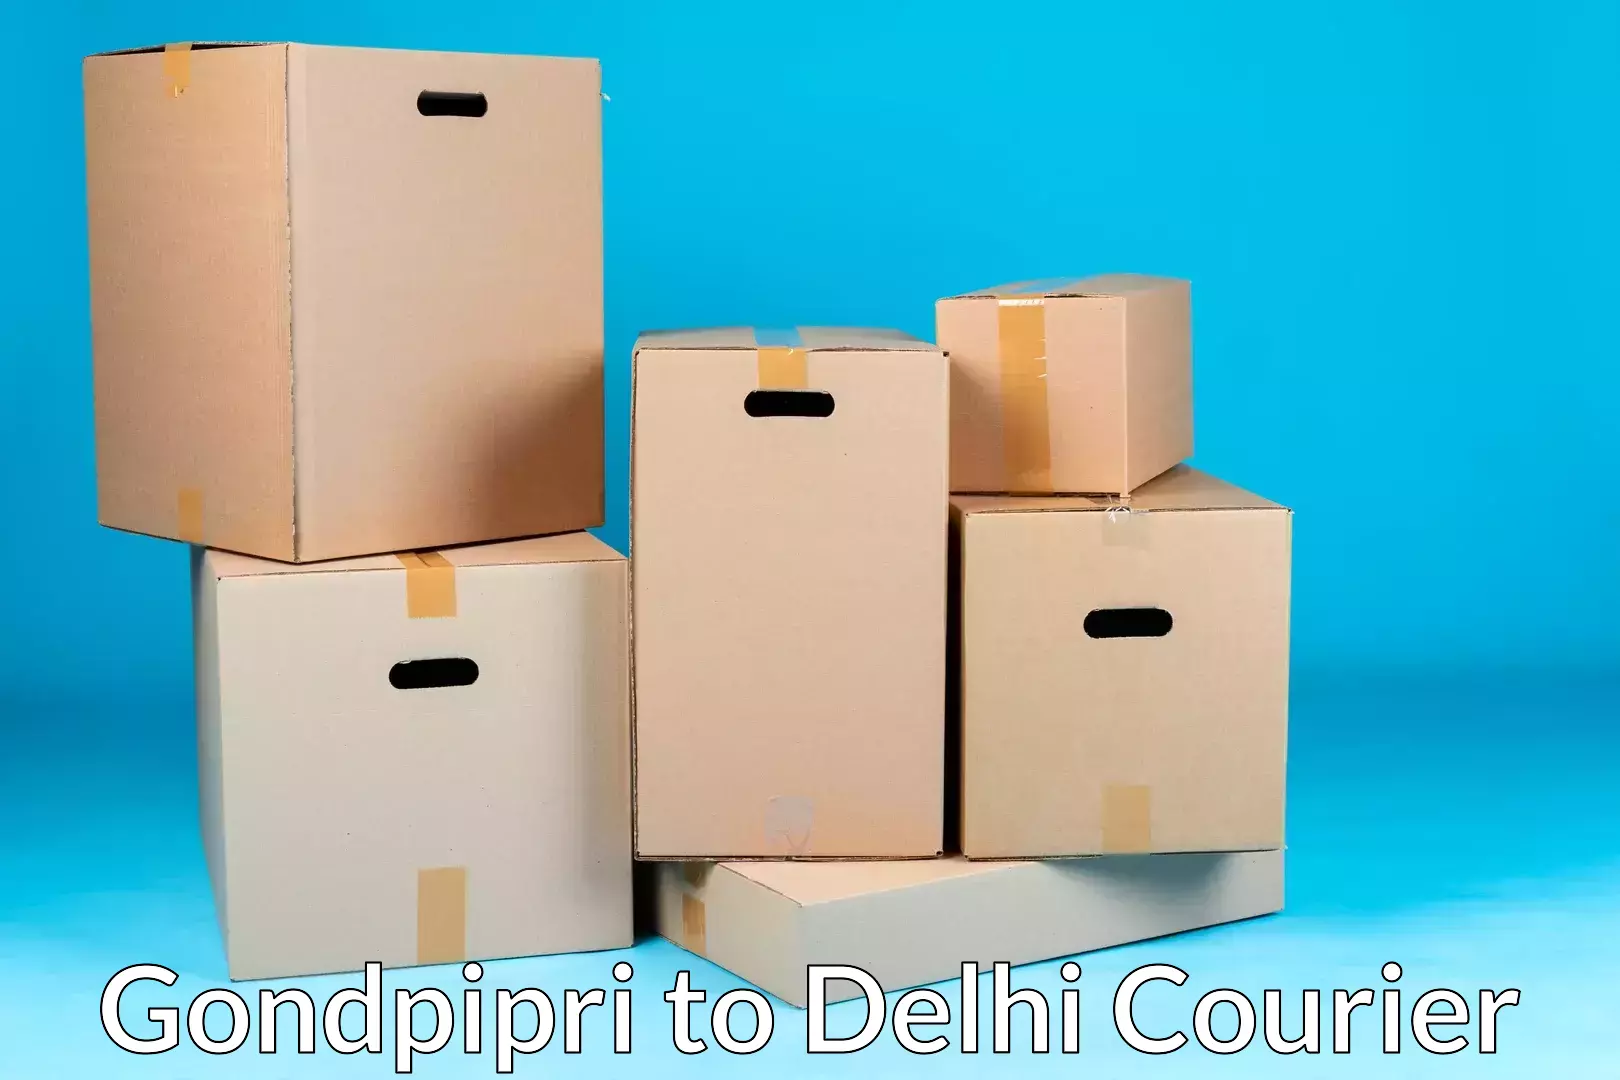 Quality relocation assistance Gondpipri to Lodhi Road